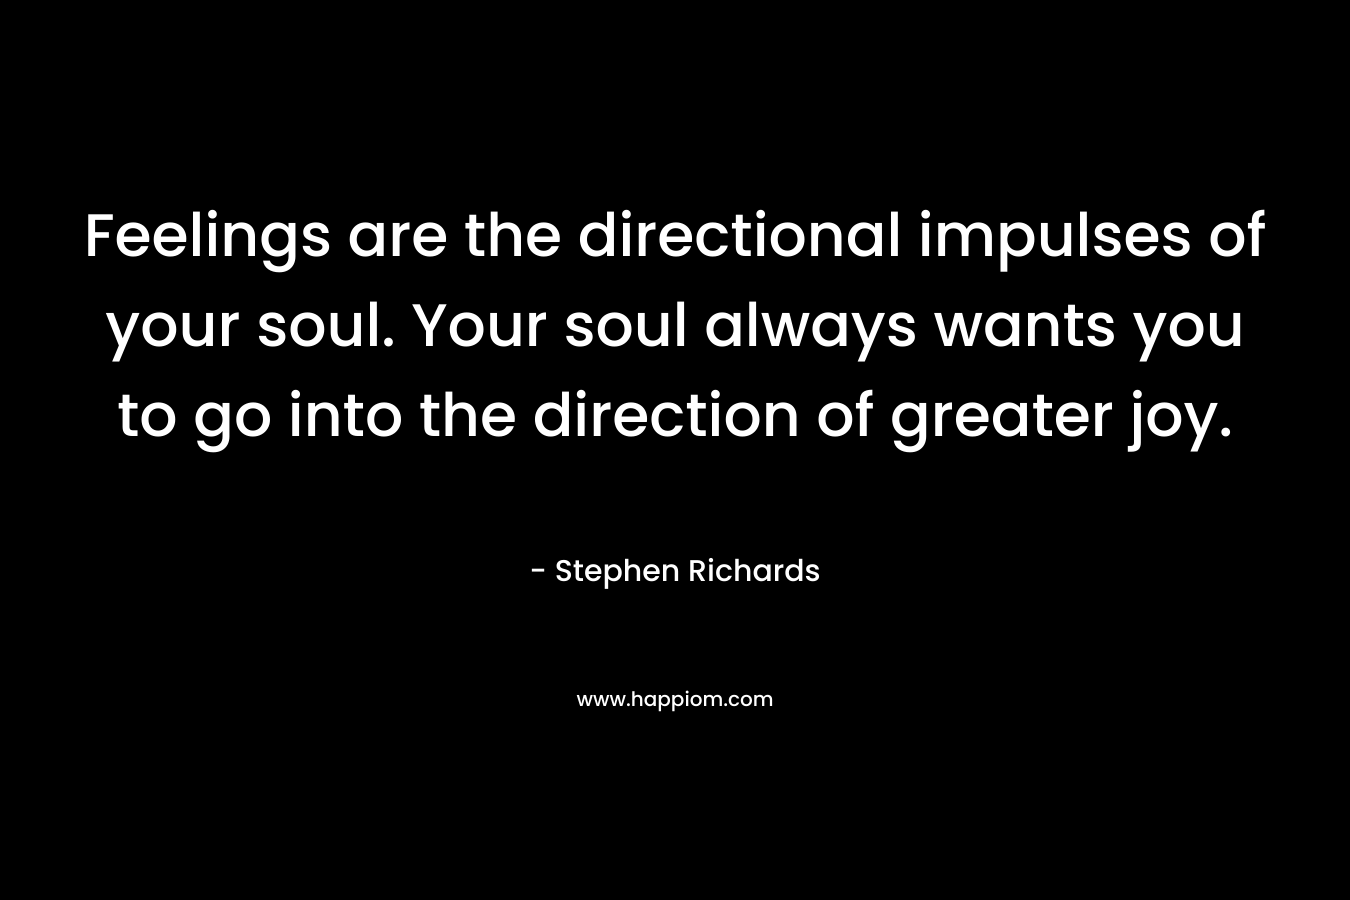 Feelings are the directional impulses of your soul. Your soul always wants you to go into the direction of greater joy. – Stephen Richards